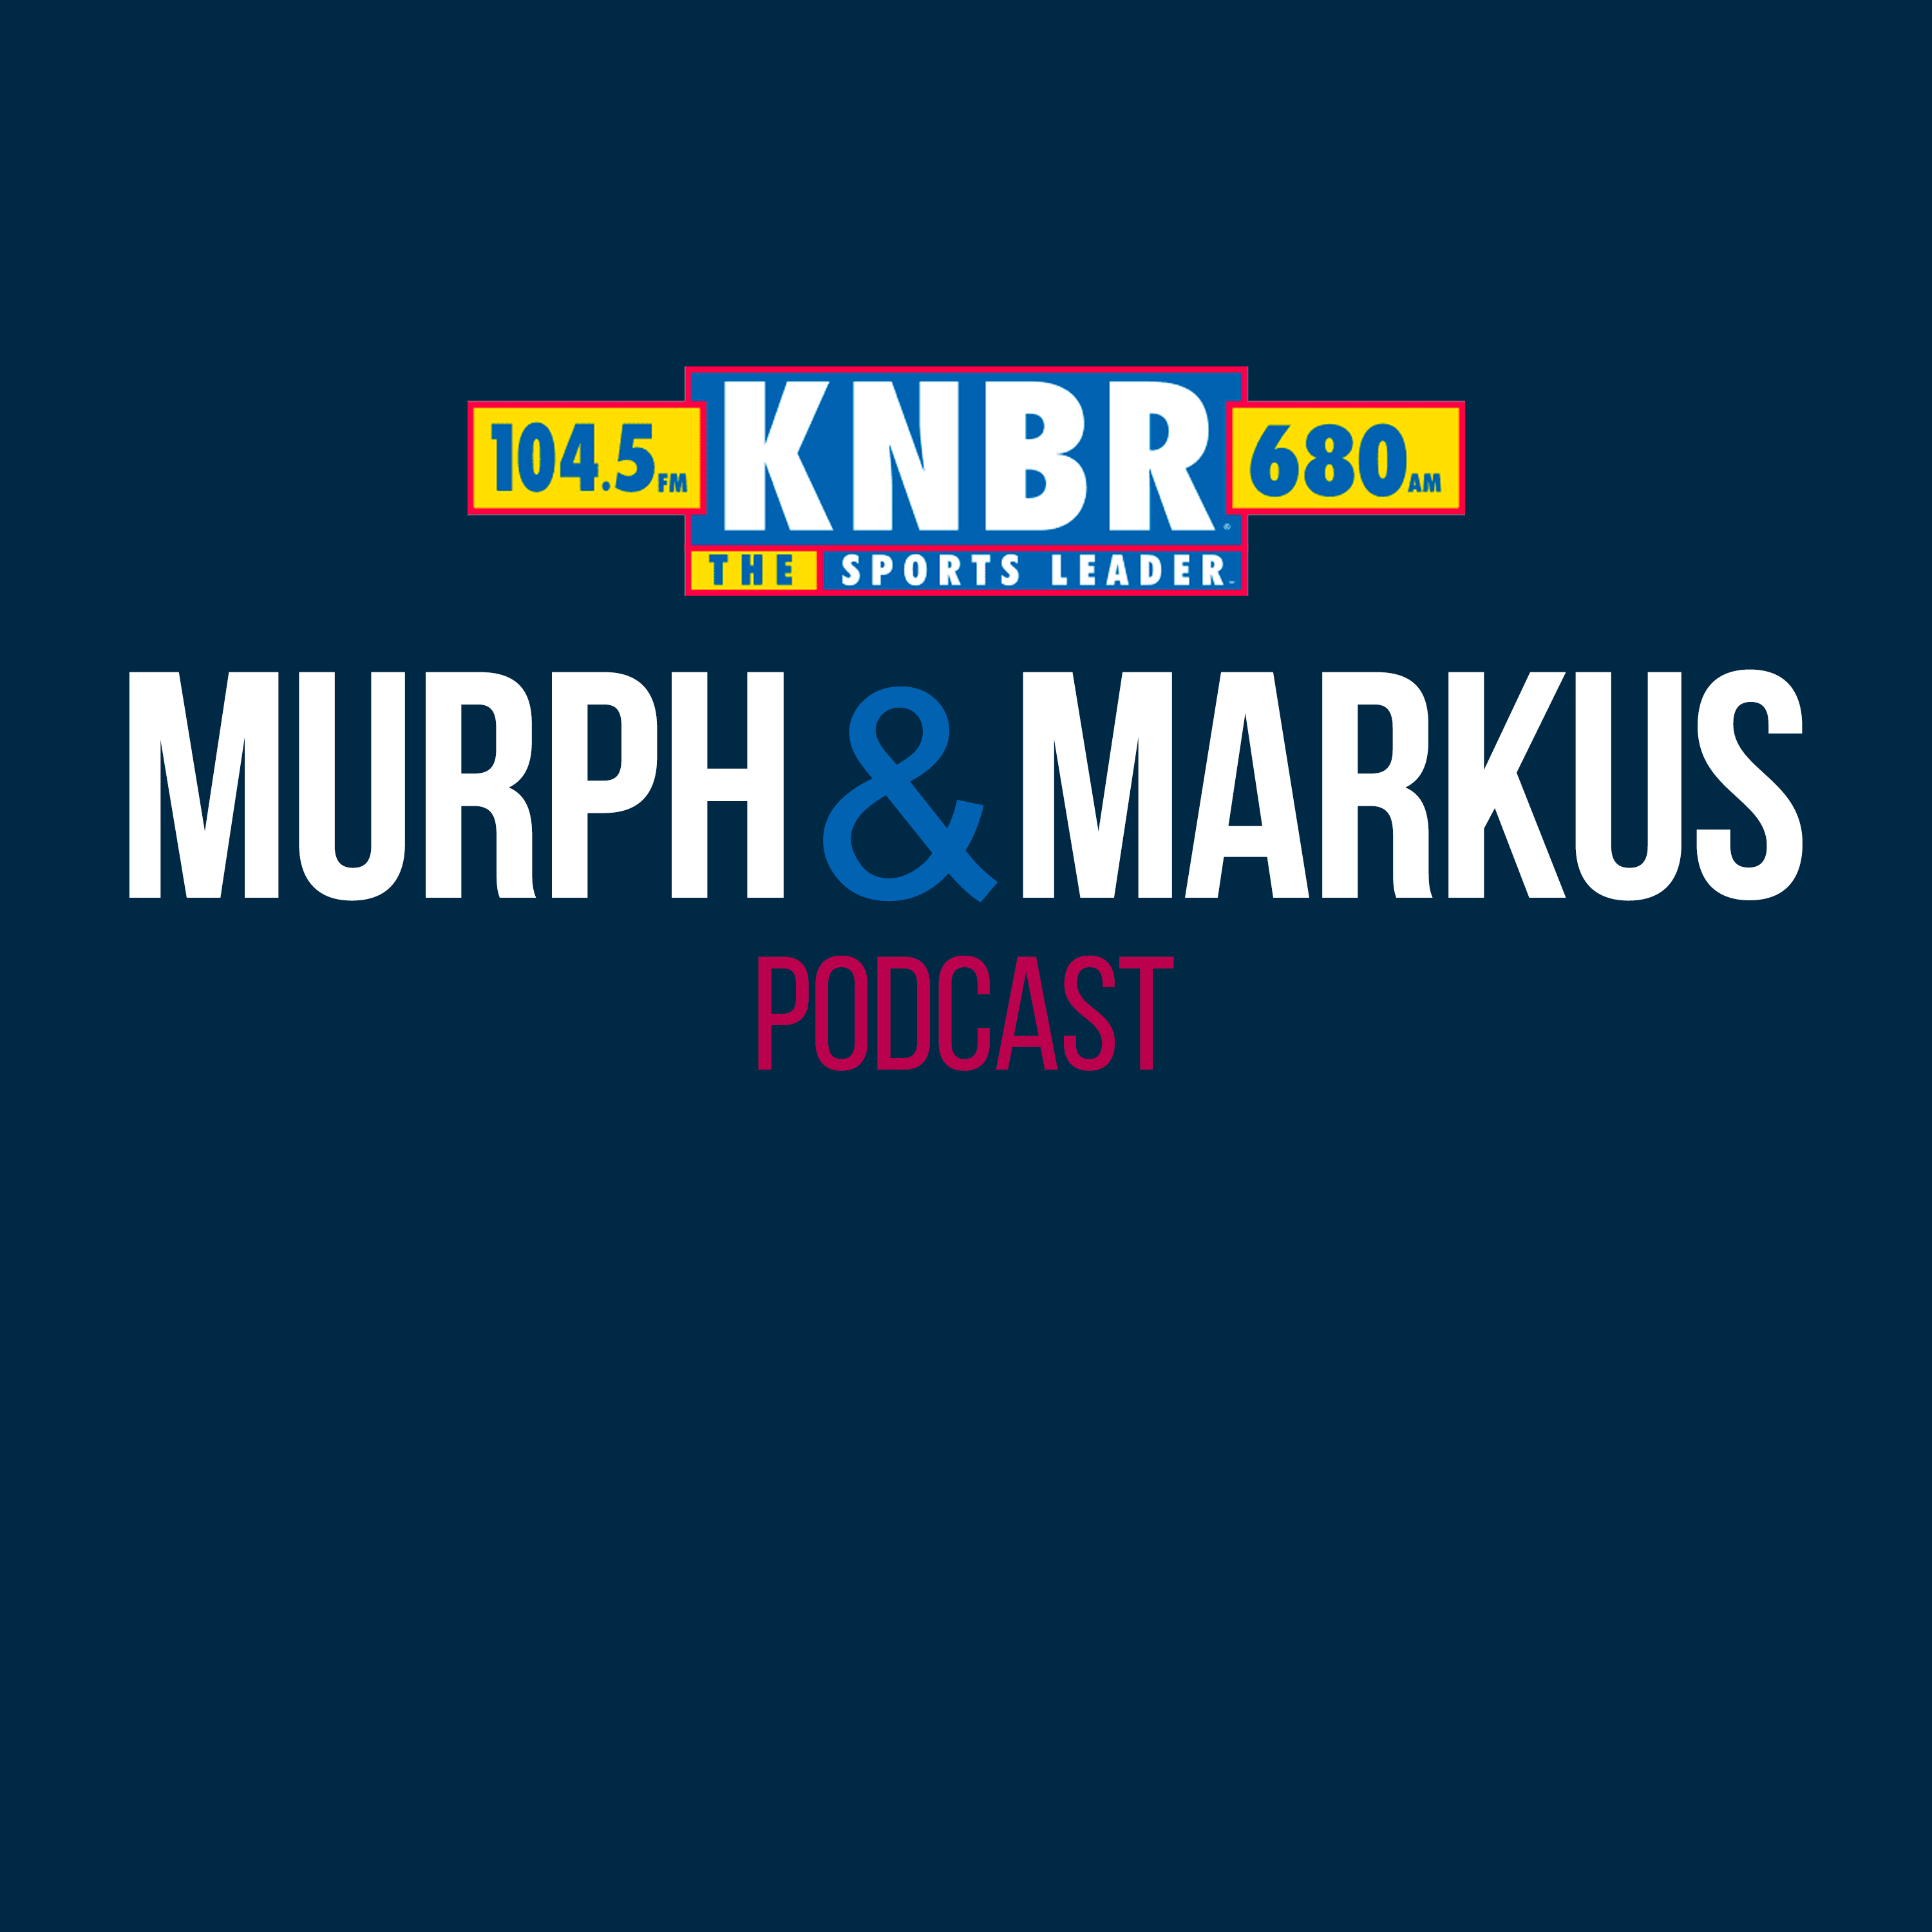 4-19 Hour 3: Murph & Markus talk to Bob Brenly, dive into the extra special Cooler of Content, and talk to Tim Kawakami